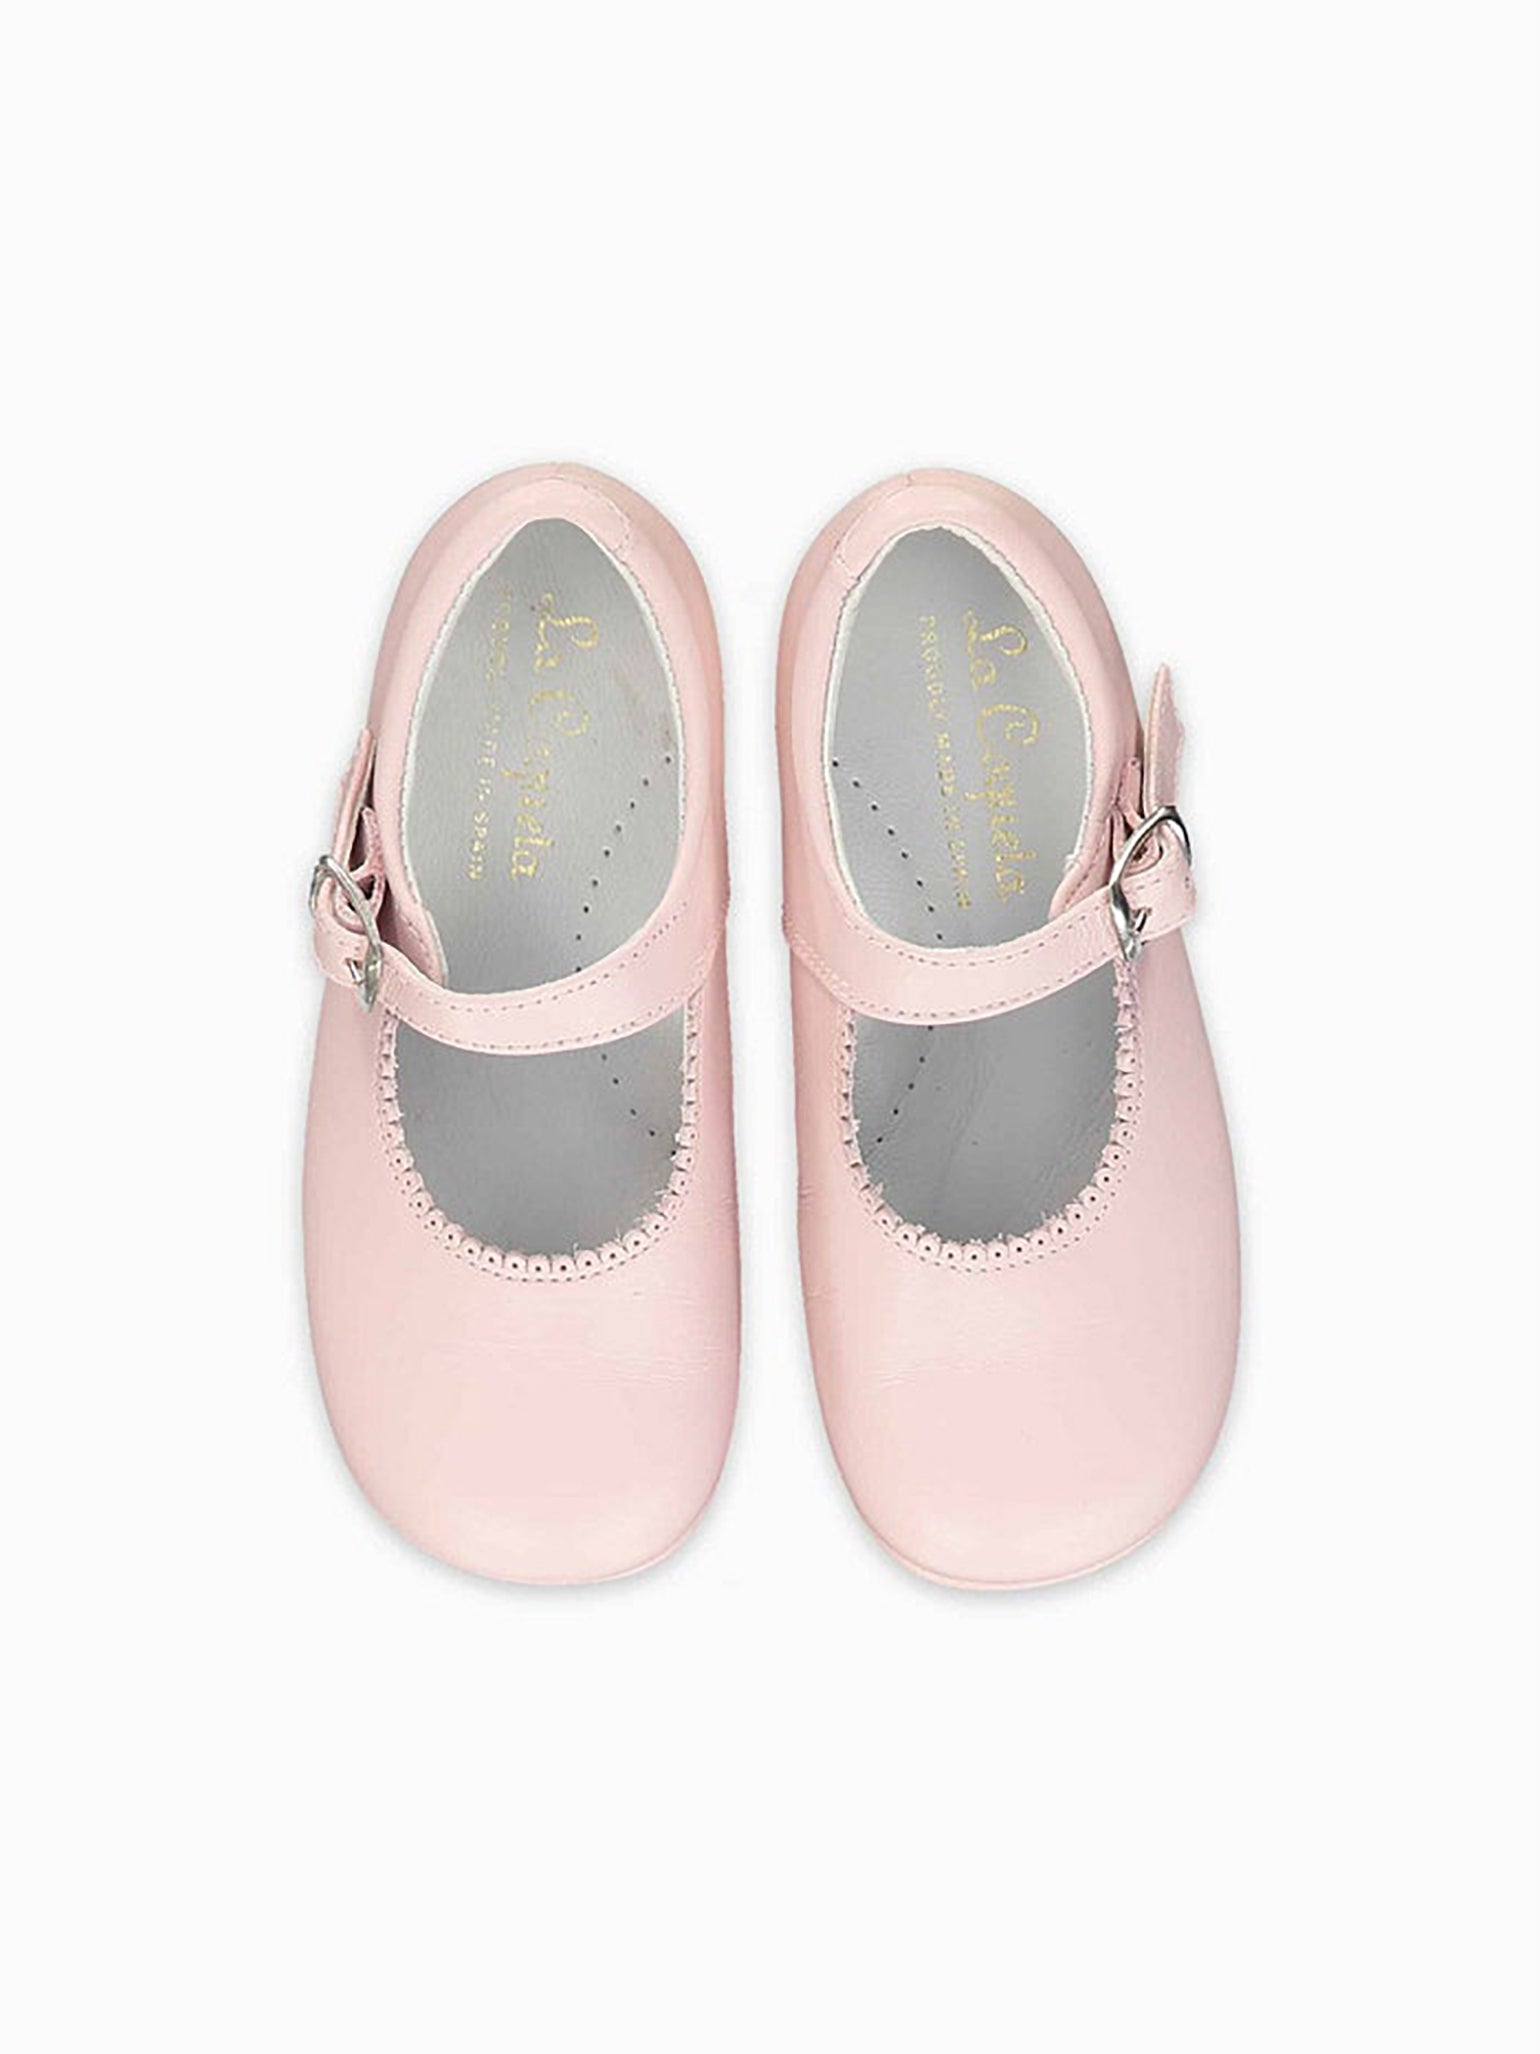 Image of Light Pink Leather Toddler Mary Jane Shoes